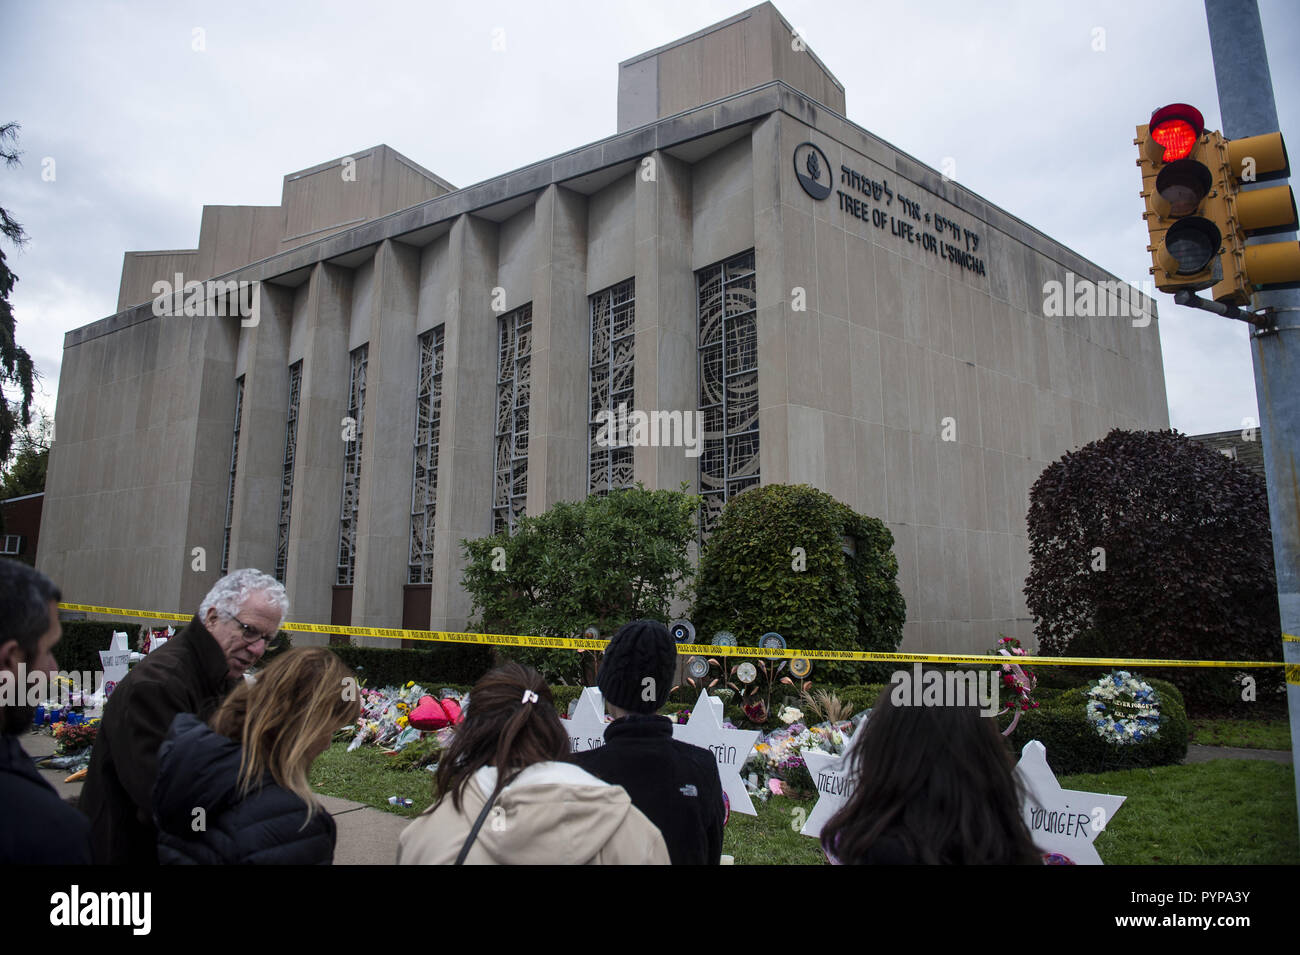 Pittsburgh, Pennsylvania, USA. 29th Oct, 2018. Mourners seen at the memorial service for the victims of the Tree of Life Massacre. Members of Pittsburgh and the Squirrel Hill community pay their respects at the memorial to the 11 victims of the Tree of Life Synagogue massacre perpetrated by suspect Robert Bowers on Saturday, October 27. Credit: Matthew Hatcher/SOPA Images/ZUMA Wire/Alamy Live News Stock Photo